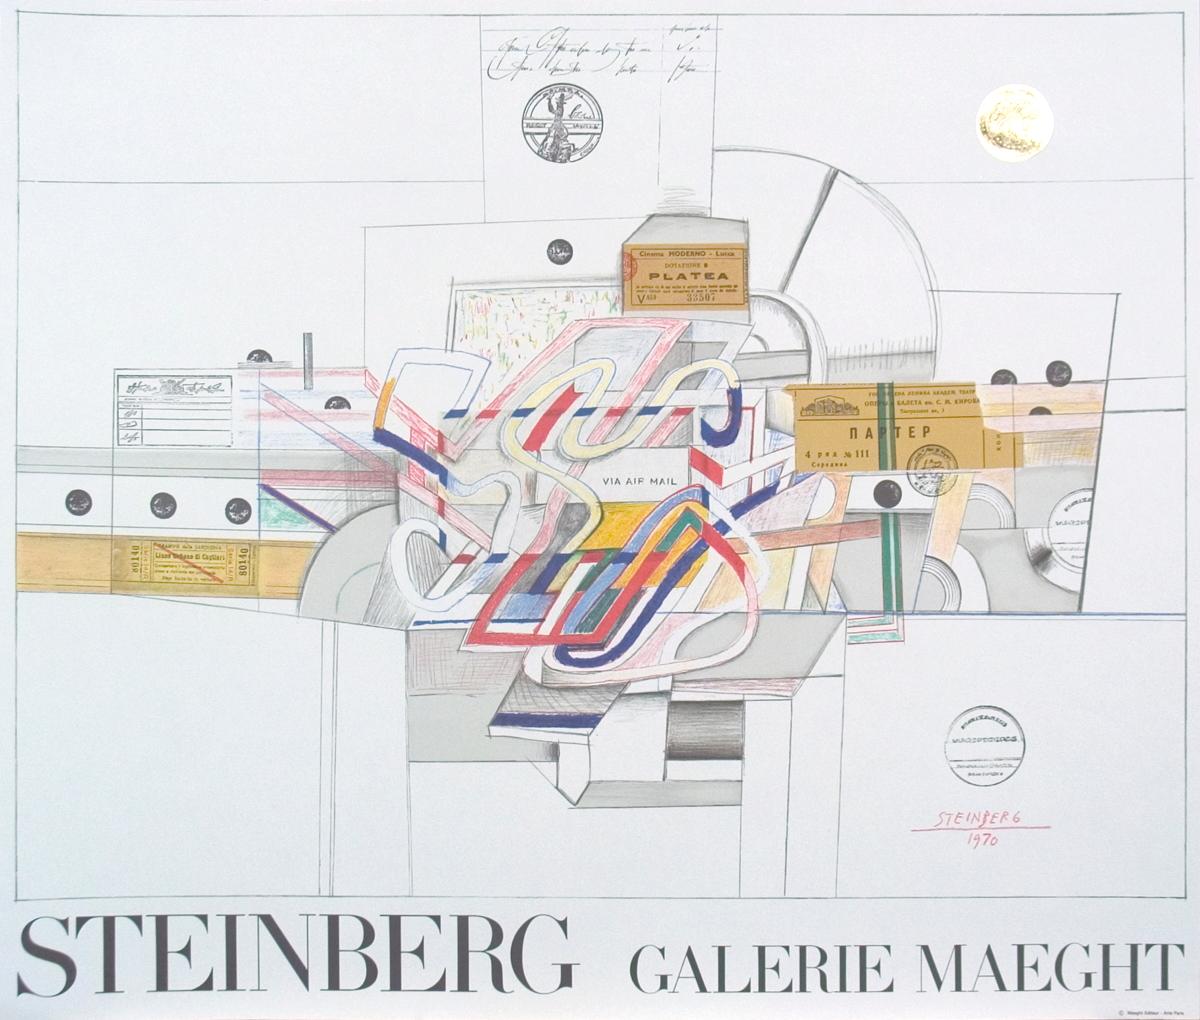 First edition lithograph by Steinberg for an exhibition held at Galerie Maeght in 1977. Limited edition, unsigned and not numbered, never framed. 
